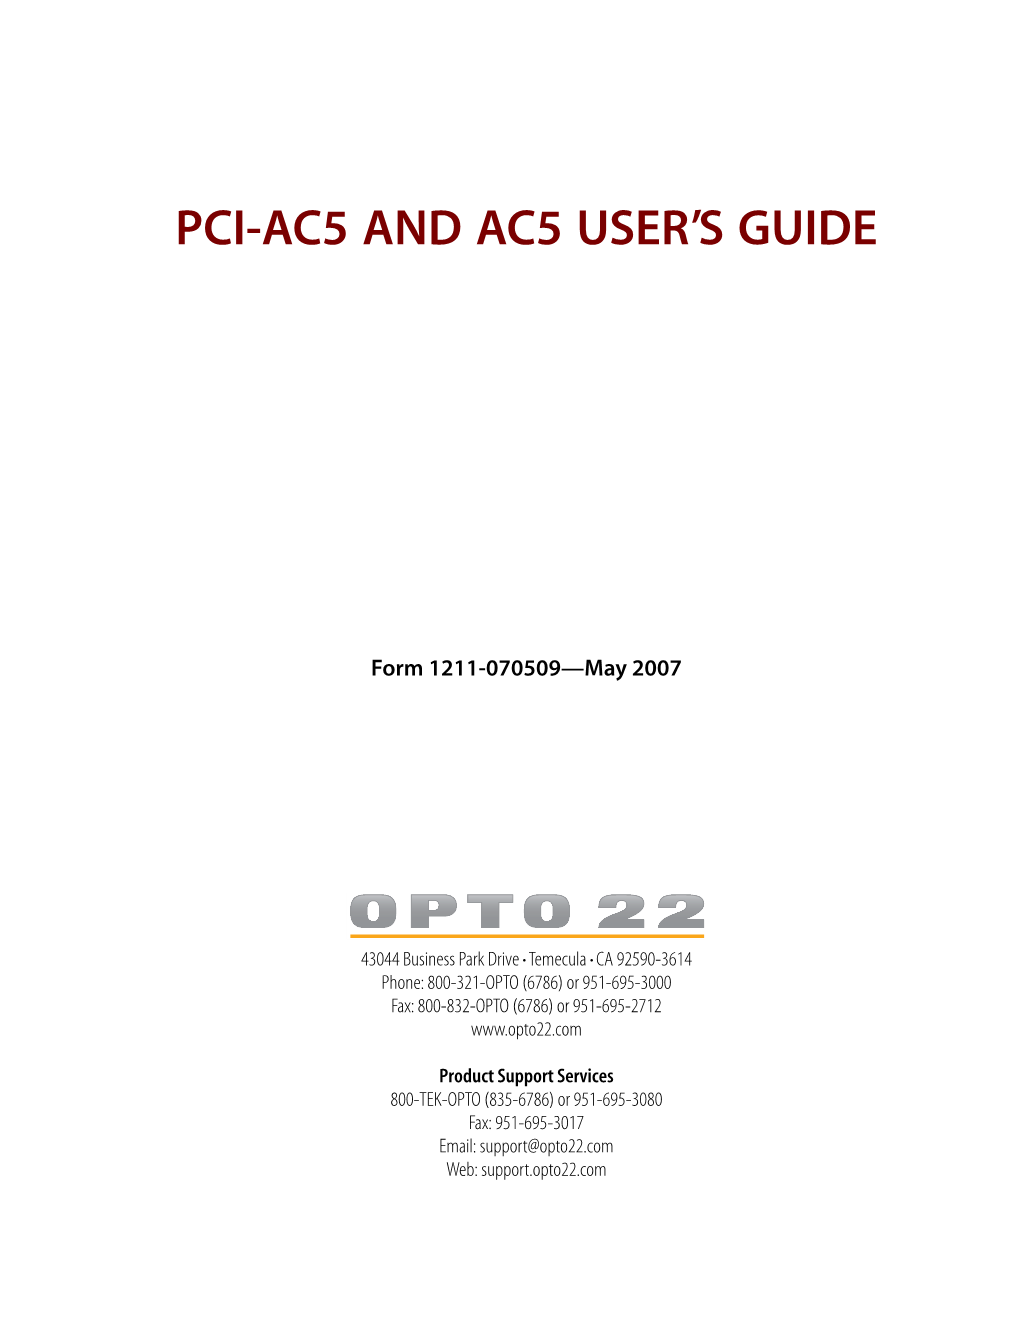 Pci-Ac5 and Ac5 User's Guide